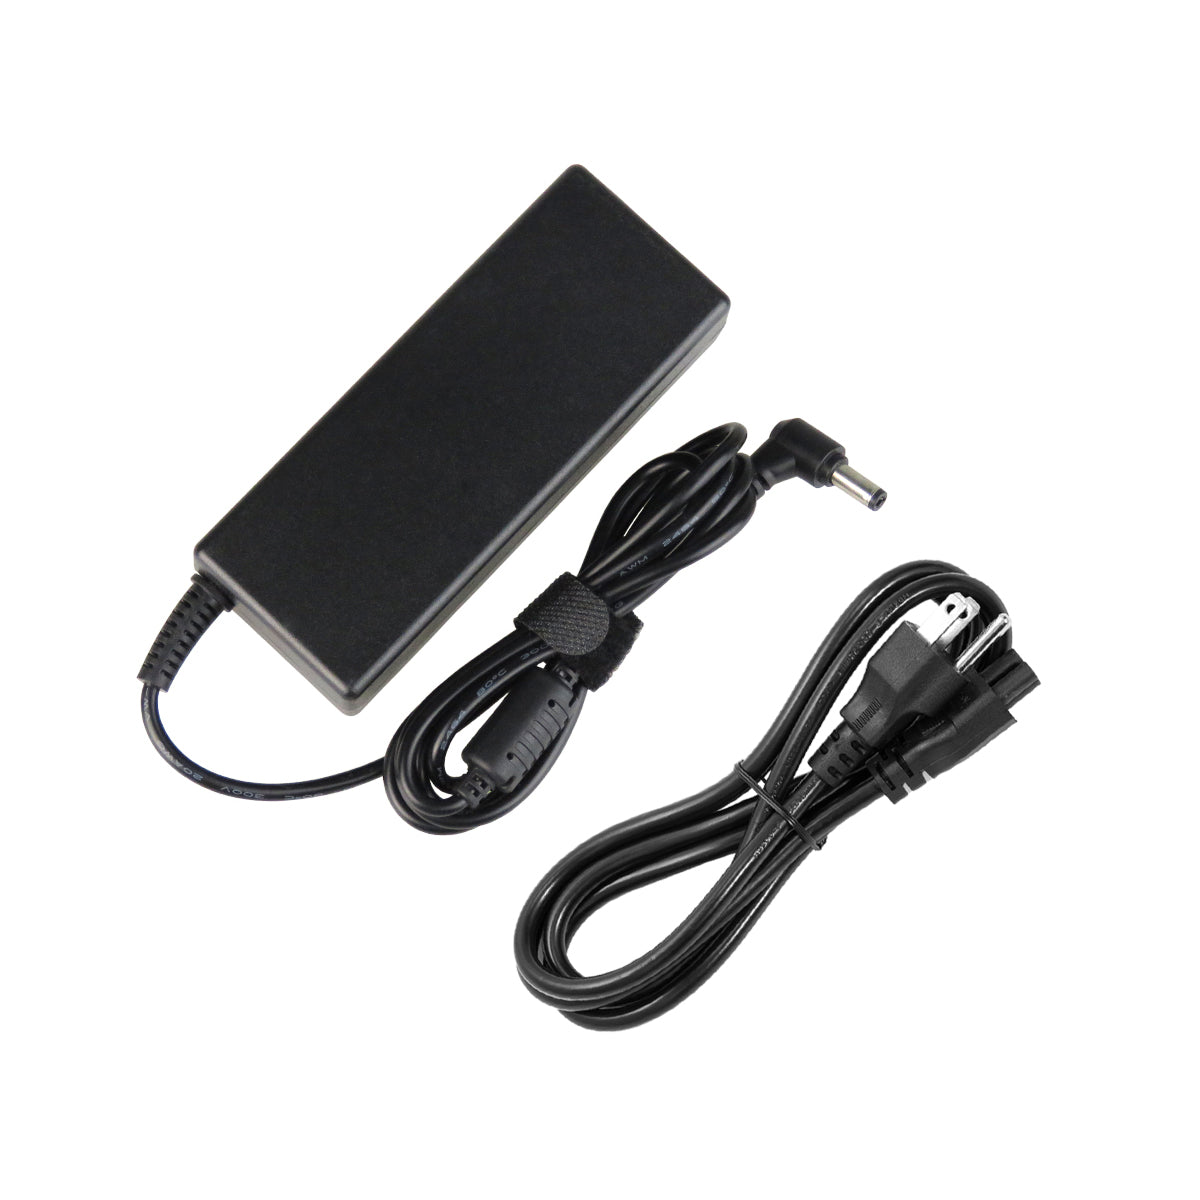 AC Adapter Charger for ASUS K54LY Notebook.